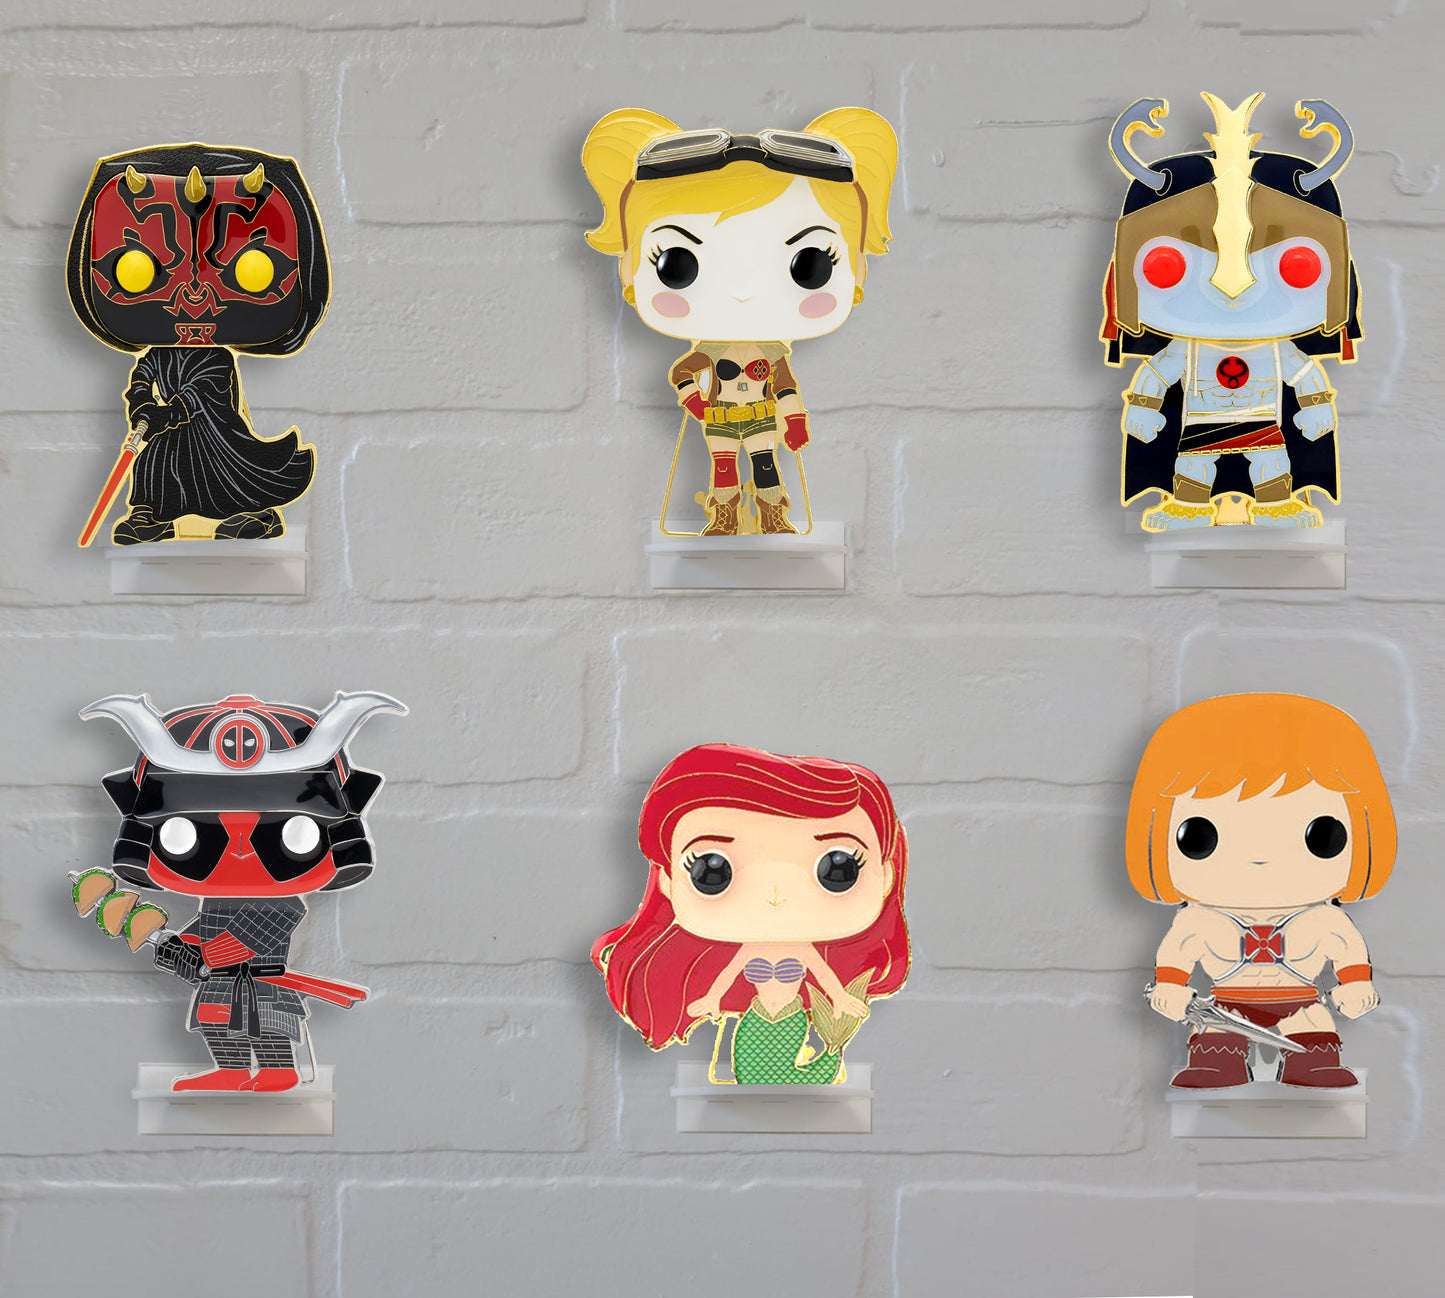 For Funko Pop Vinyl or Funko Pin, White Acrylic Wall Stand, Stick On, Single Shelf No Nails or Screws